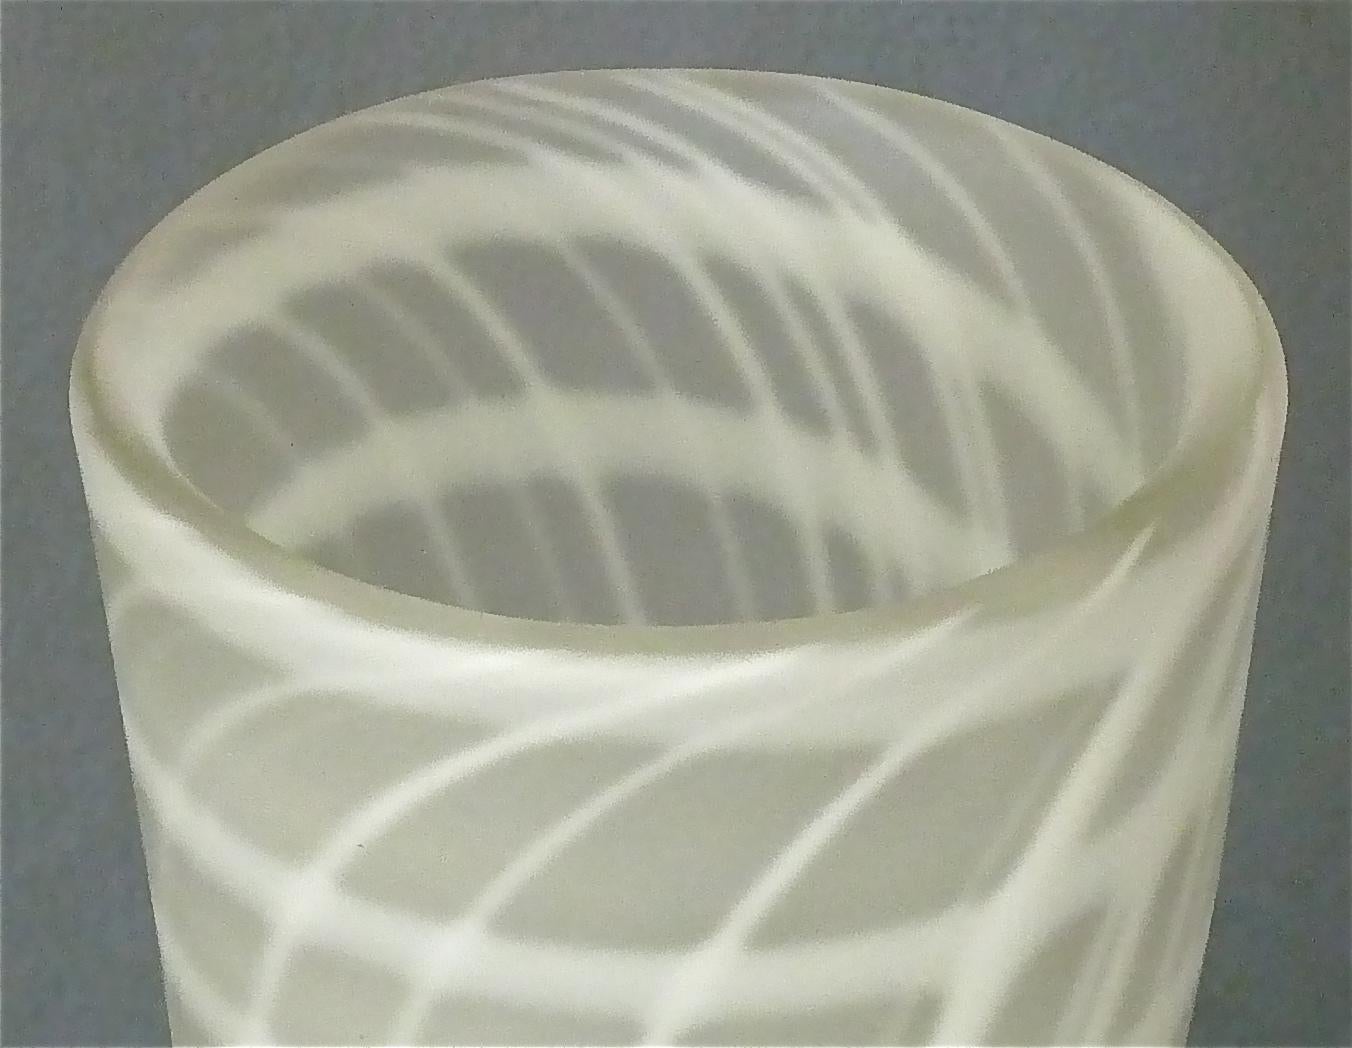 Hand-Crafted Signed Large Giuliano Tosi Art Glass Vase Satin White Stripes, Italy, 1970s For Sale